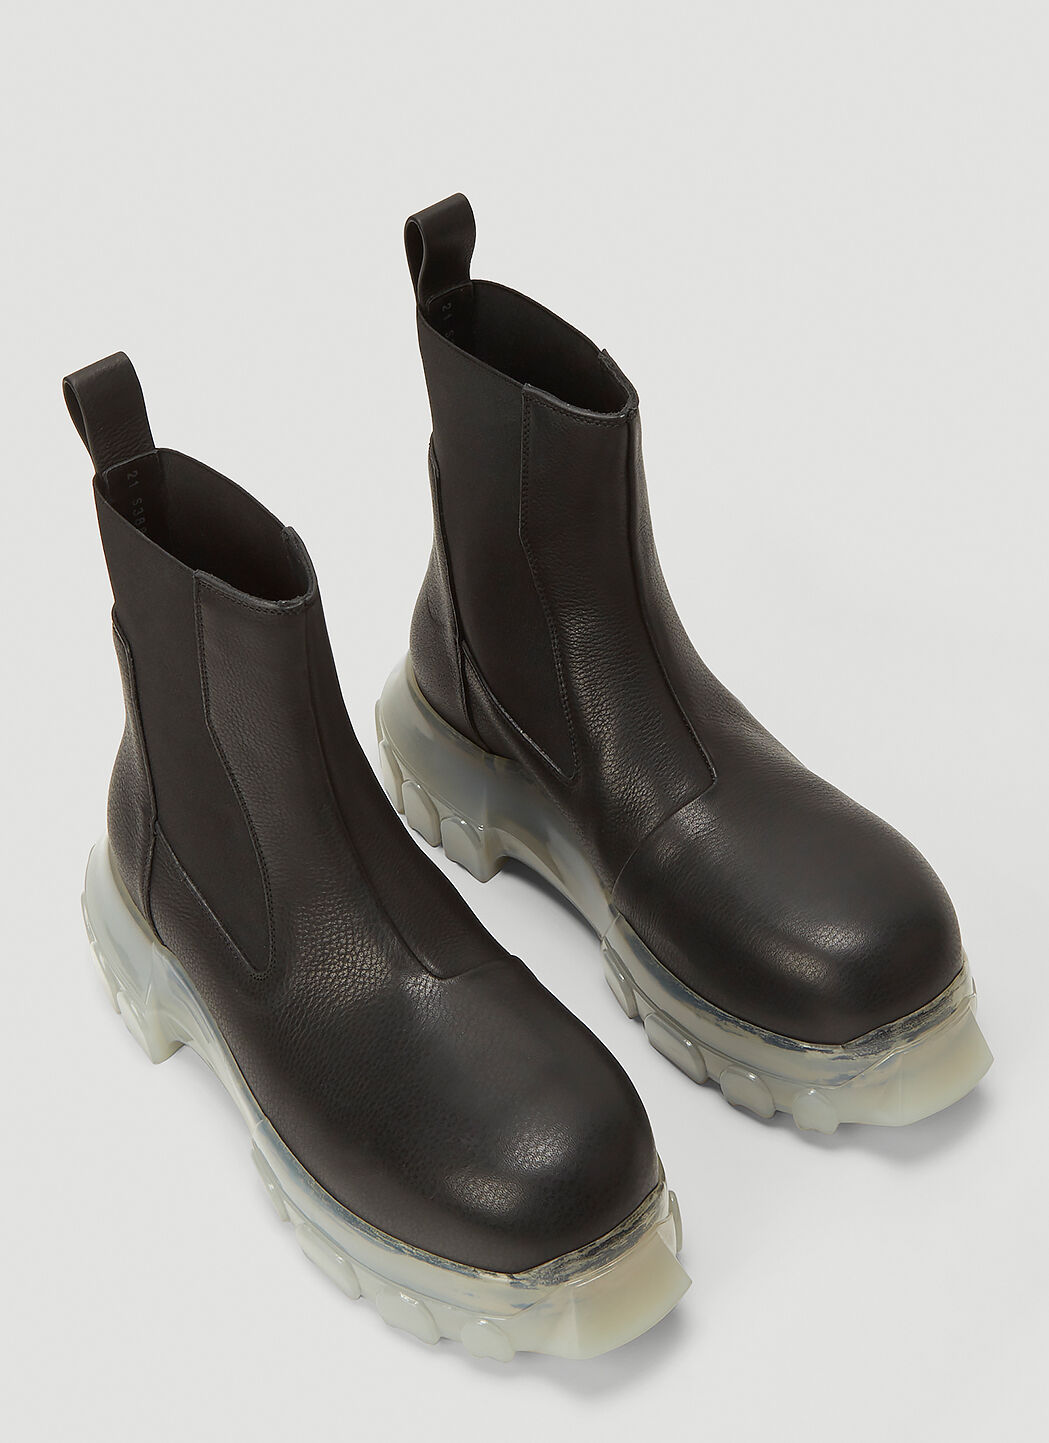 Rick Owens Bozo Tractor Beetle Boots in Black | LN-CC